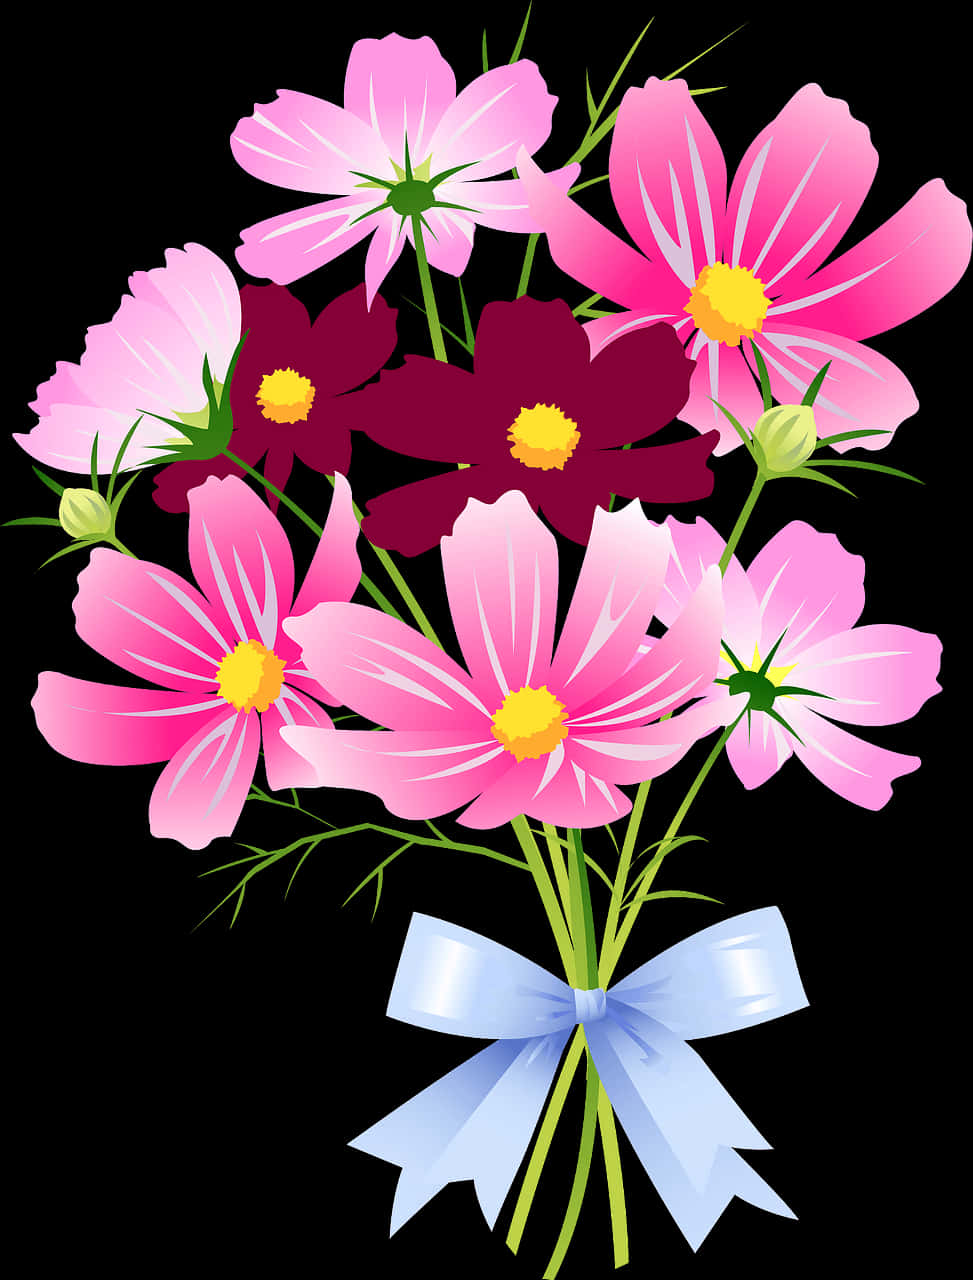 A Bouquet Of Pink Flowers With A Blue Bow